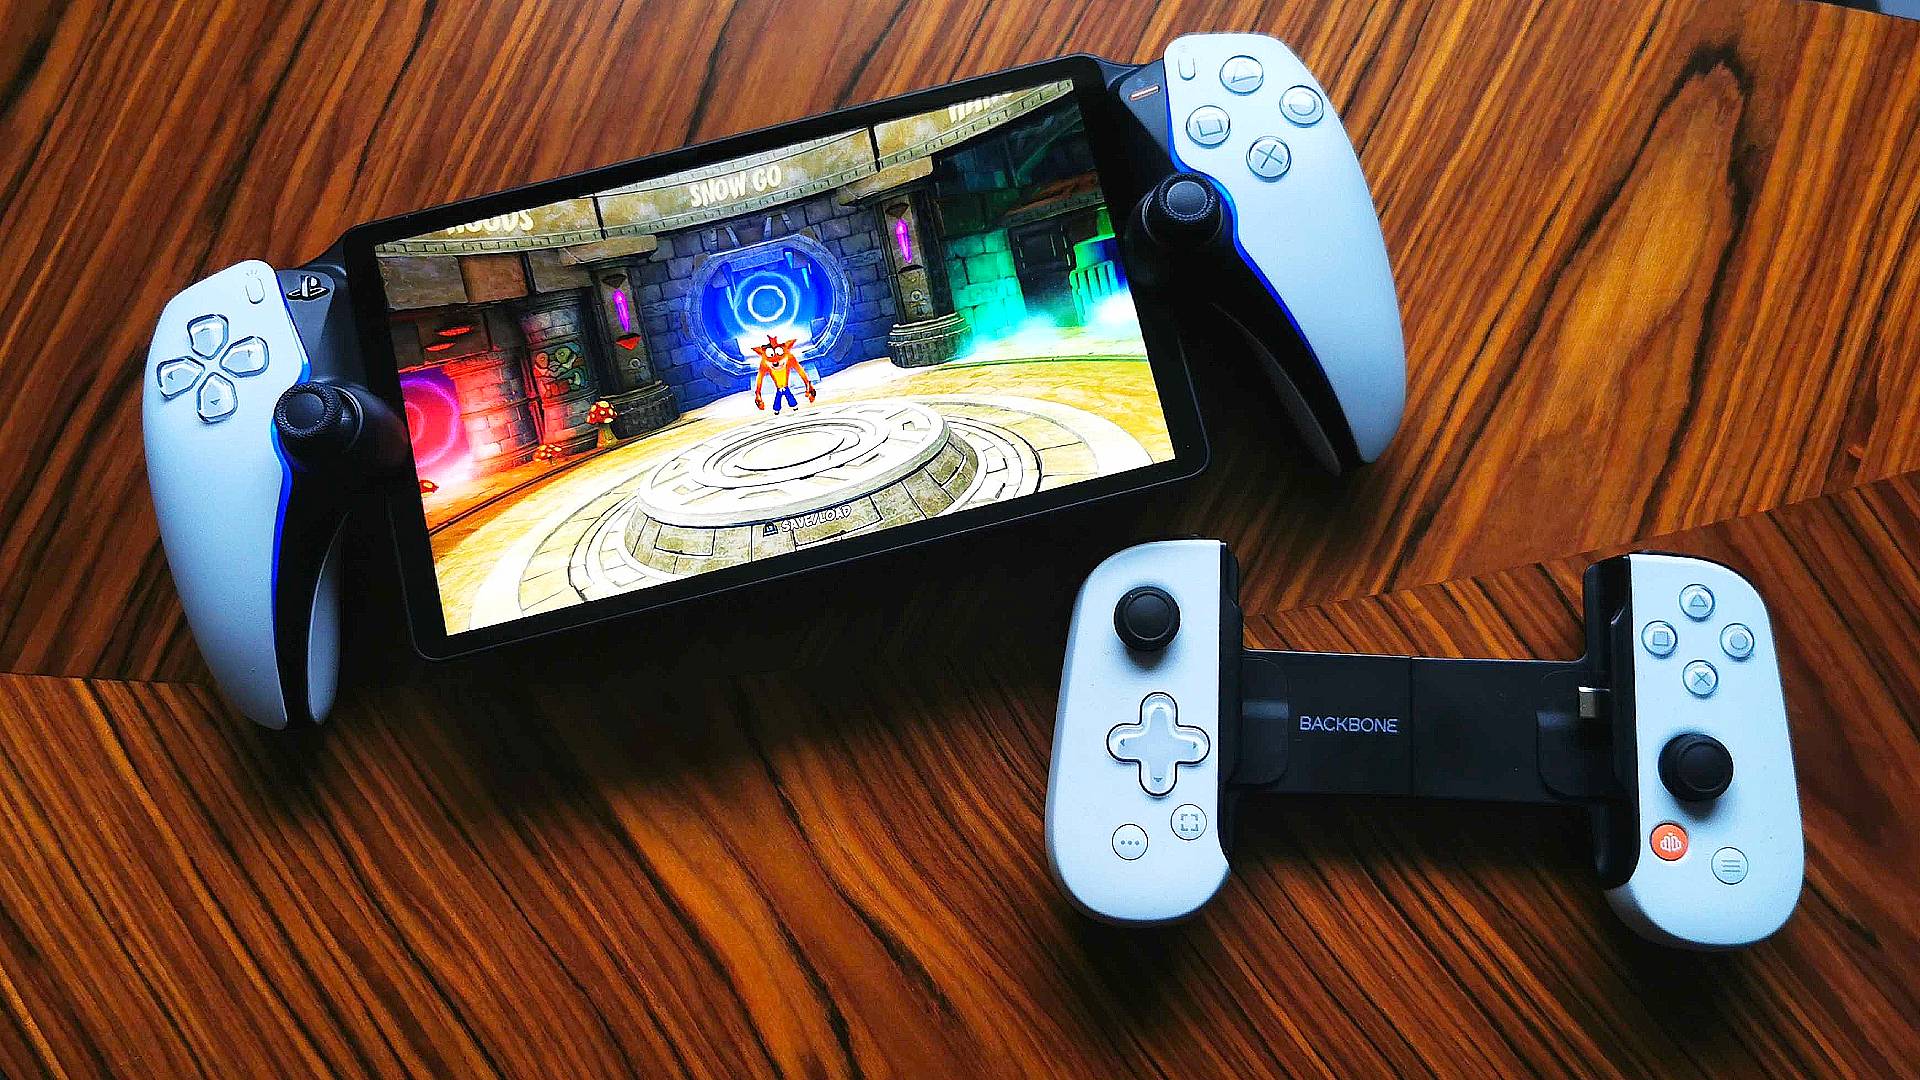 Sony's PlayStation Portal remote player is a $200 handheld just